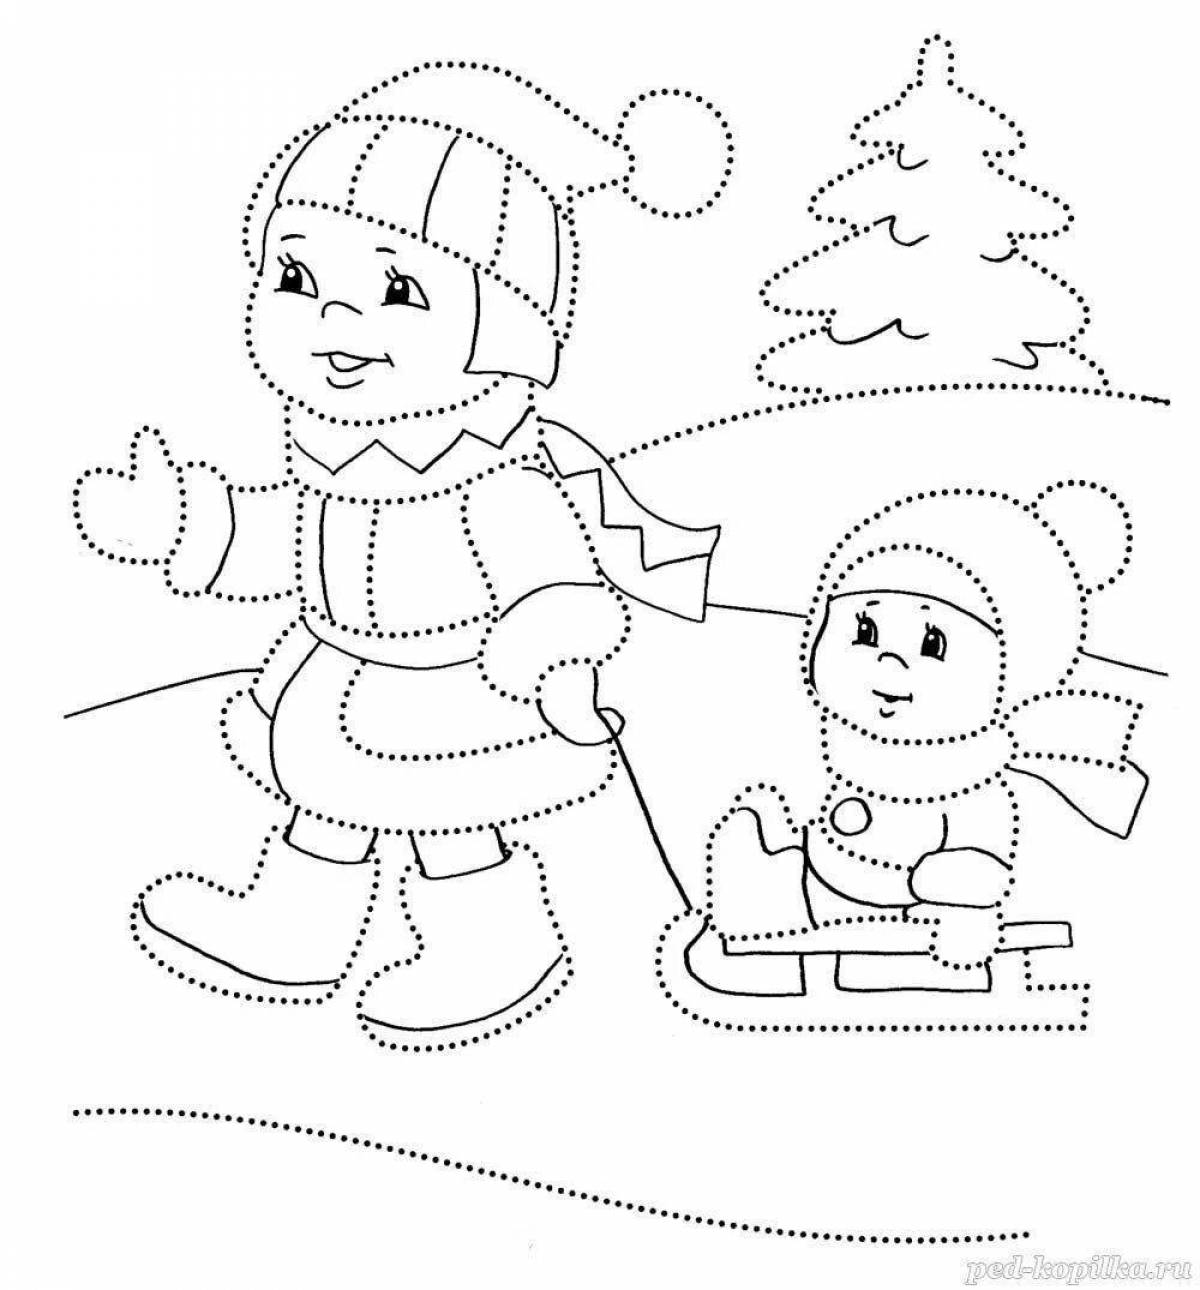 Colourful winter coloring book for children 2-3 years old